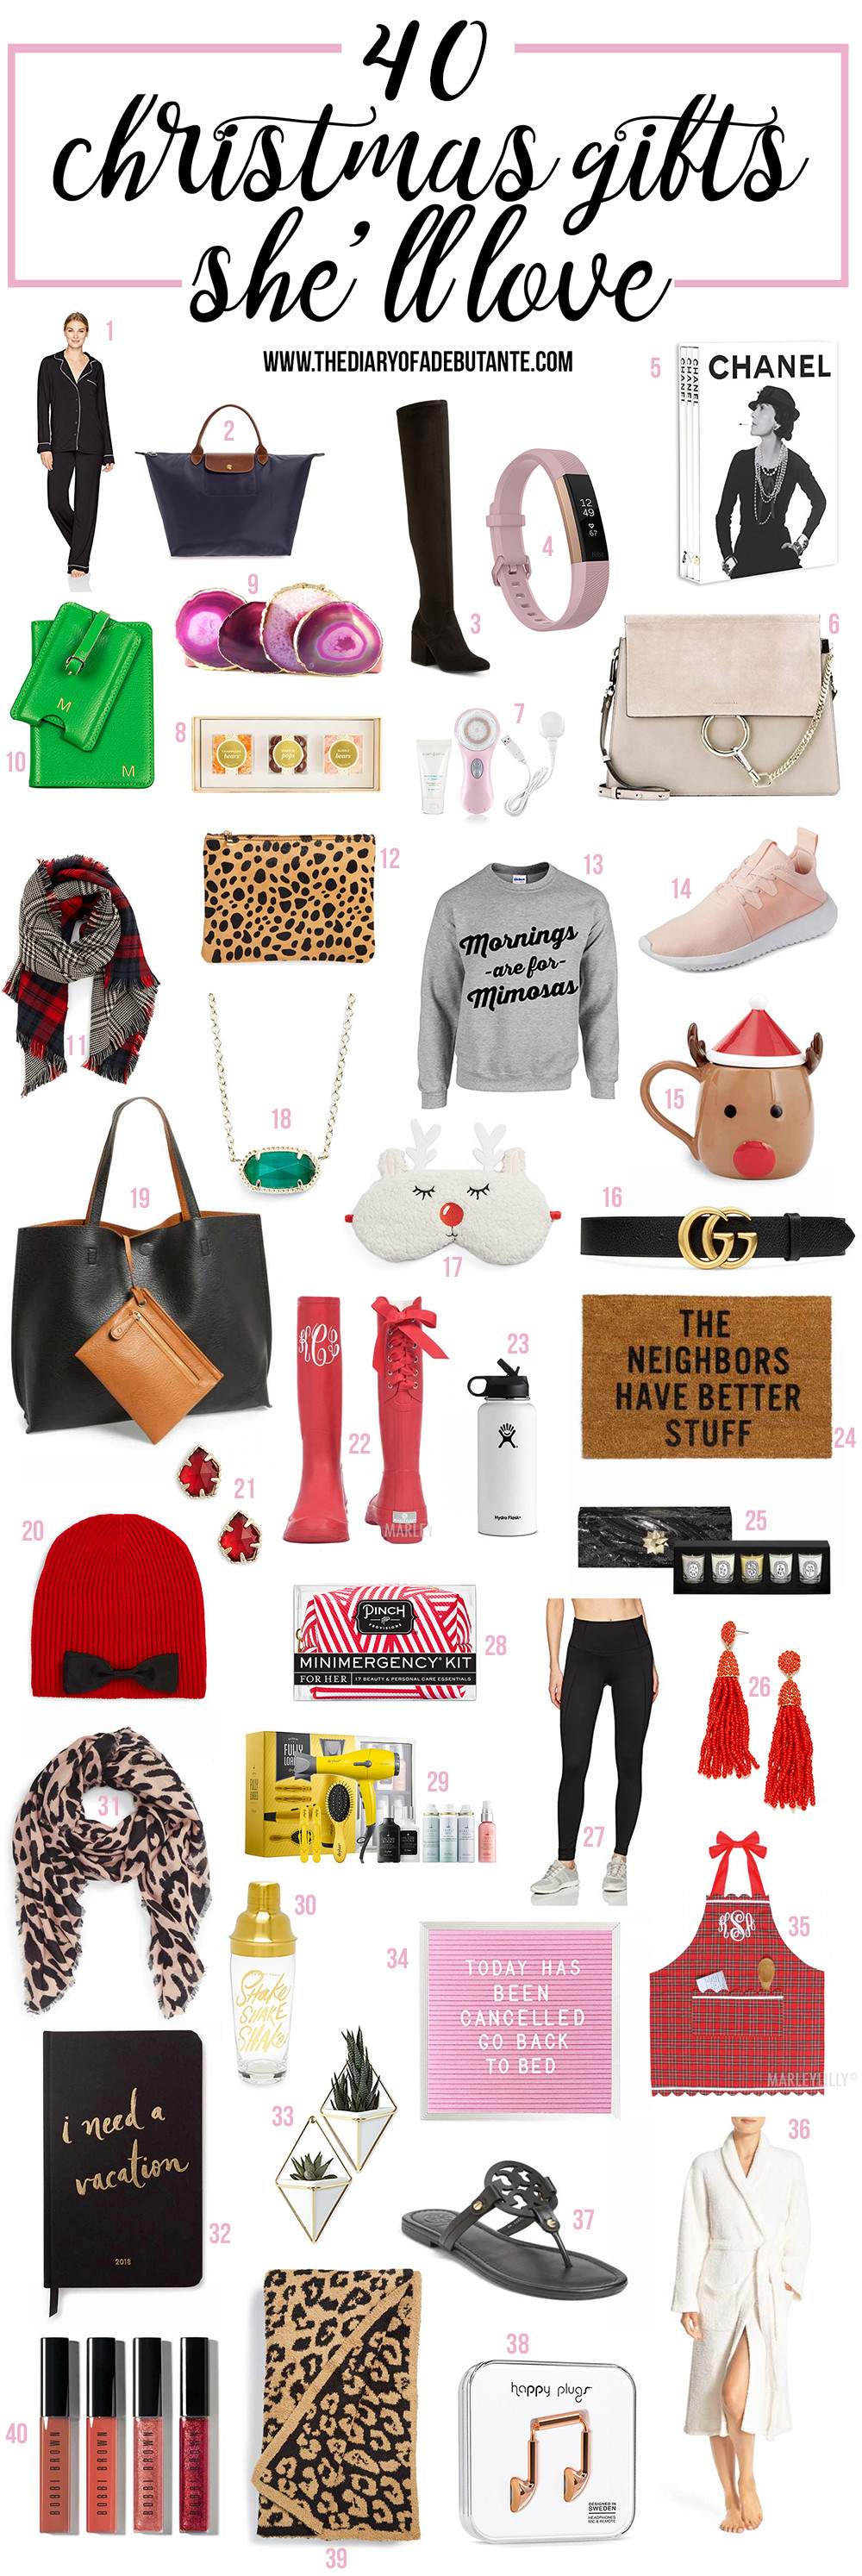 Cute Christmas Gift Ideas For Girlfriend
 Cool Gift Ideas for Girlfriend Mom or BFF this Holiday